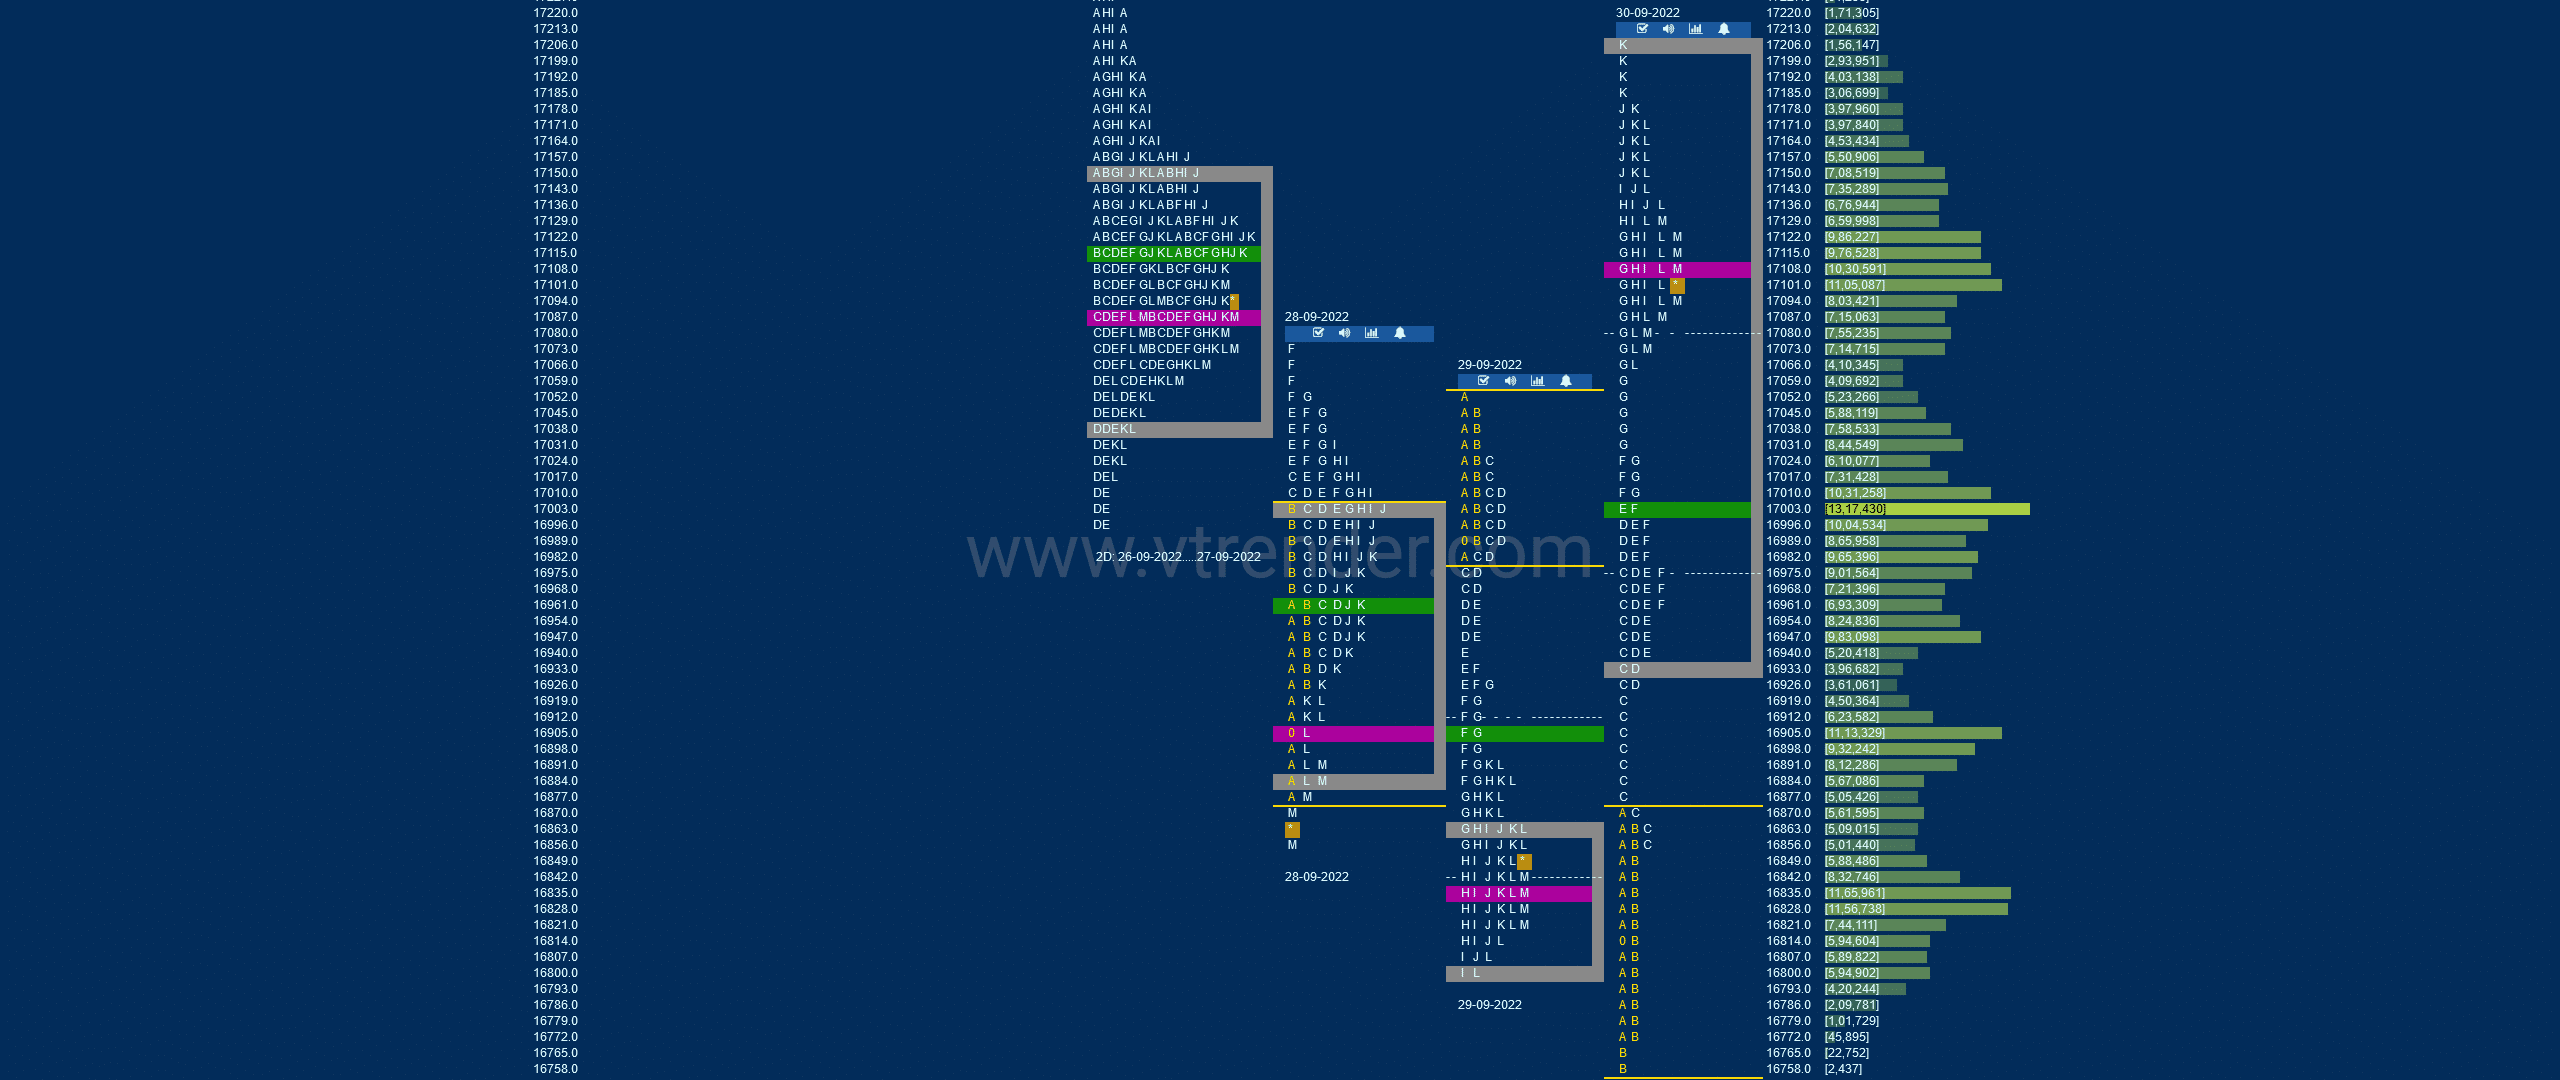 Nf Market Profile Analysis Dated 30Th Sep 2022 Banknifty Futures, Charts, Day Trading, Intraday Trading, Intraday Trading Strategies, Market Profile, Market Profile Trading Strategies, Nifty Futures, Order Flow Analysis, Support And Resistance, Technical Analysis, Trading Strategies, Volume Profile Trading